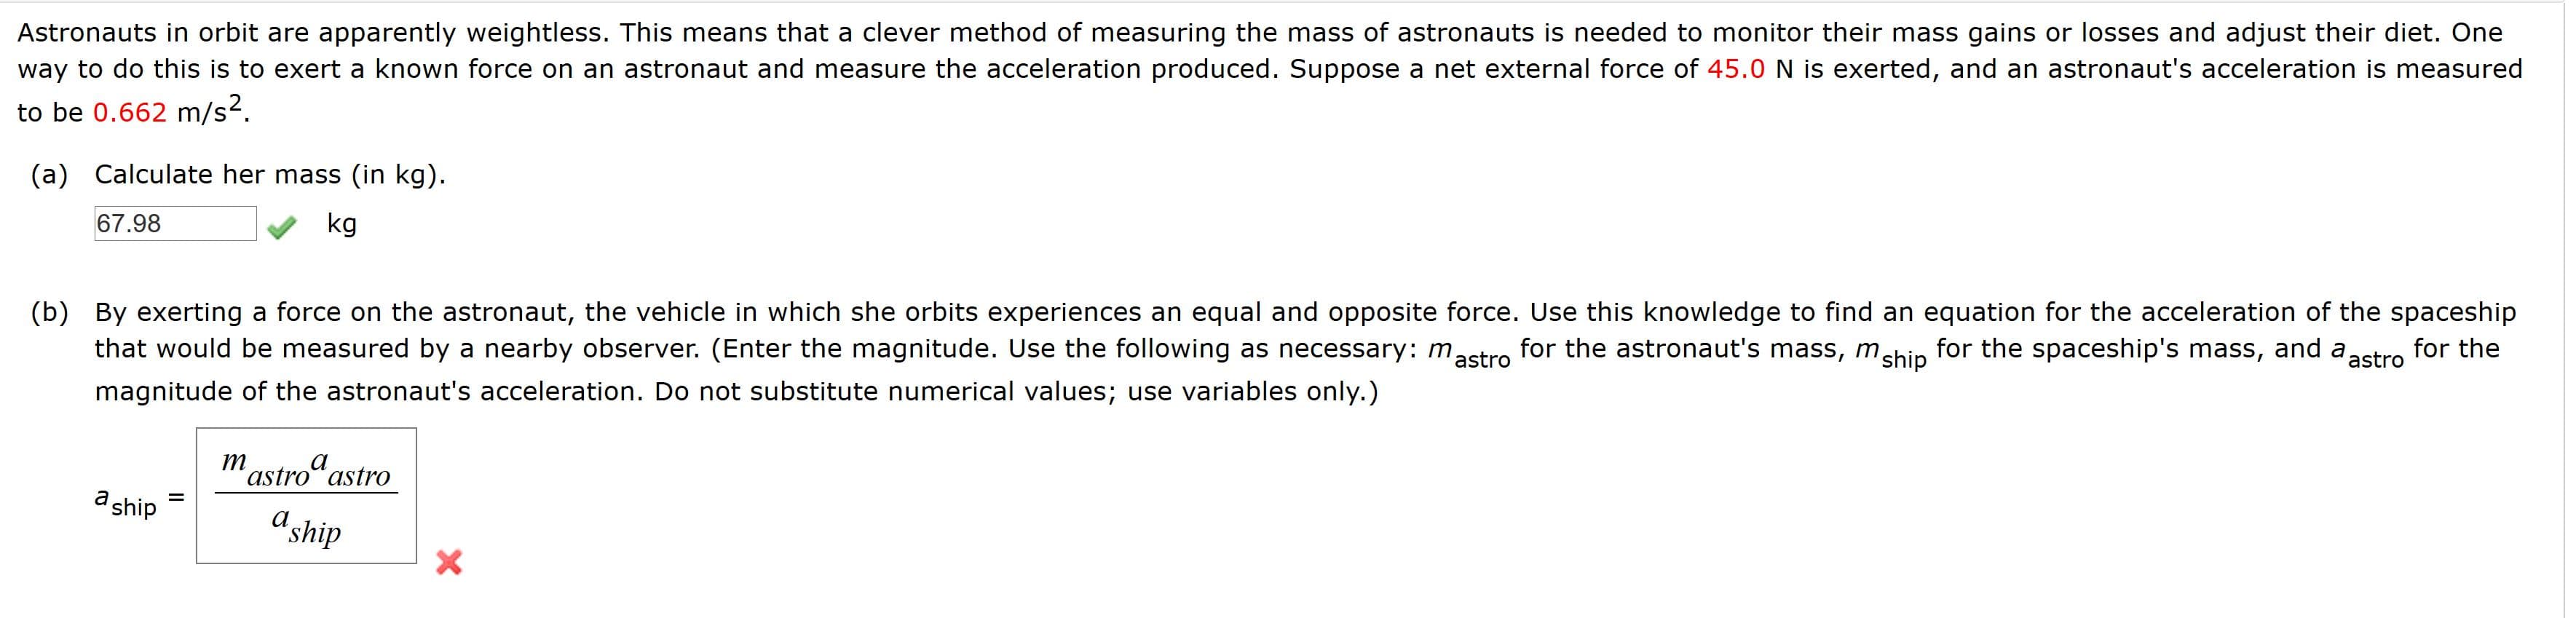 Astronauts in orbit are apparently weightless. This means that a clever method of measuring the mass of astronauts is needed to monitor their mass gains or losses and adjust their diet. One
way to do this is to exert a known force on an astronaut and measure the acceleration produced. Suppose a net external force of 45.0 N is exerted, and an astronaut's acceleration is measured
to be 0.662 m/s².
(a) Calculate her mass (in kg).
67.98
kg
(b) By exerting a force on the astronaut, the vehicle in which she orbits experiences an equal and opposite force. Use this knowledge to find an equation for the acceleration of the spaceship
that would be measured by a nearby observer. (Enter the magnitude. Use the following as necessary: mastro
for the astronaut's mass, mship
for the spaceship's mass, and a astro
for the
magnitude of the astronaut's acceleration. Do not substitute numerical values; use variables only.)
mastro“ astro
a ship
aship
